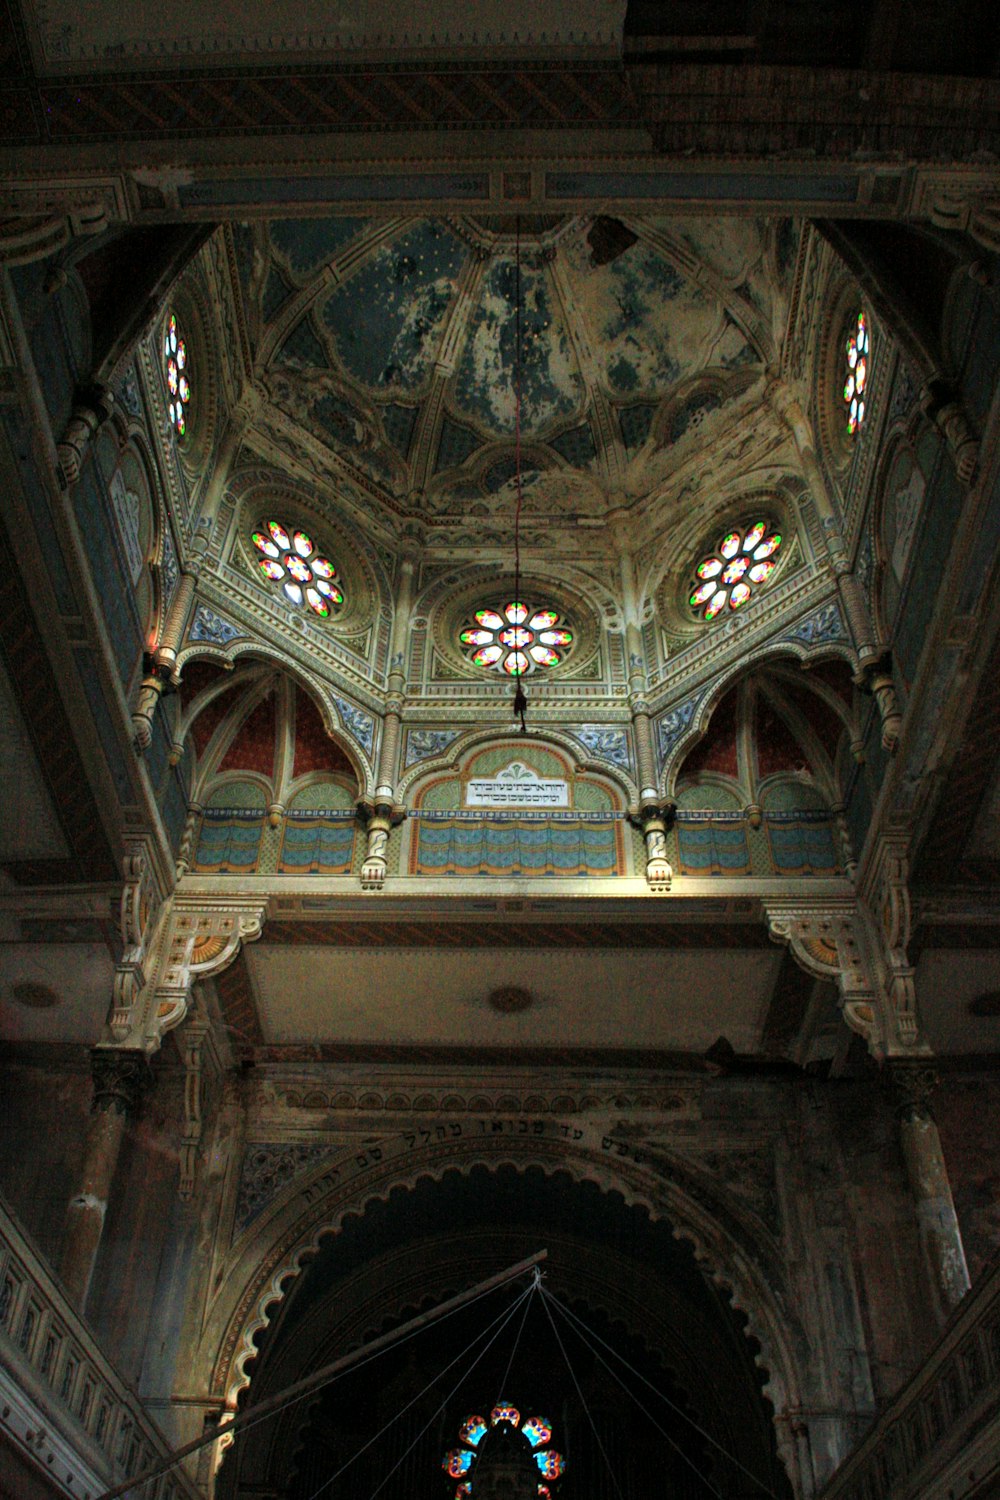 the ceiling of a large building with stained glass windows